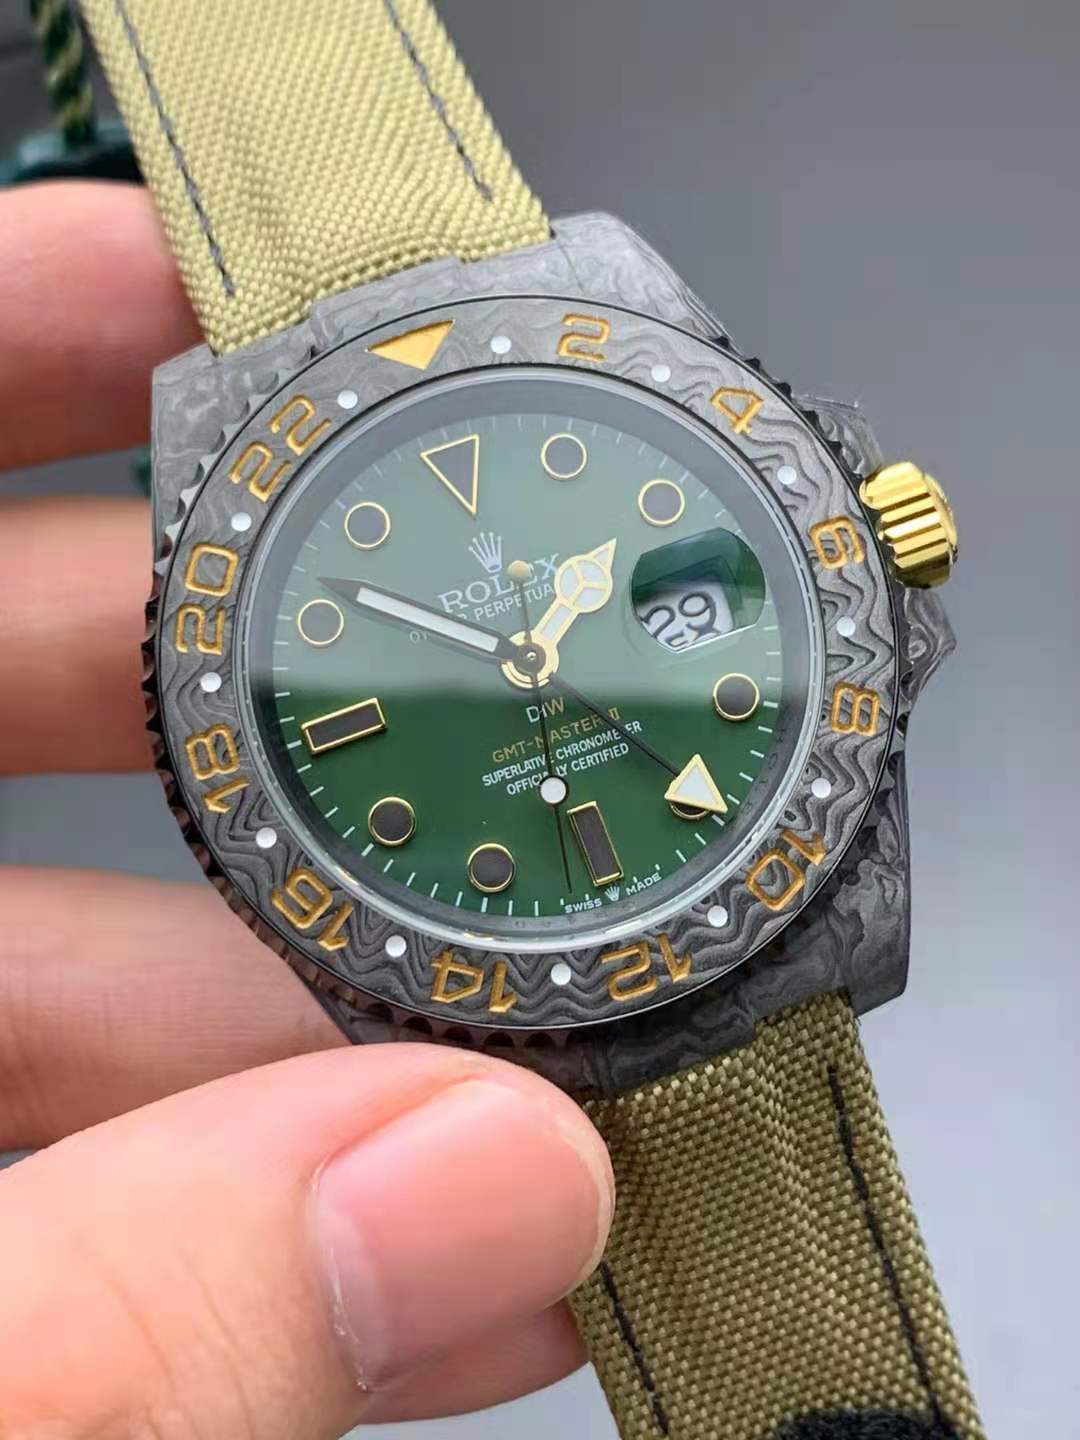 JH Factory Replica Rolex GMT-Master II DIW Carbon Watch with 3186 Movement â Hot Spot on Replica 